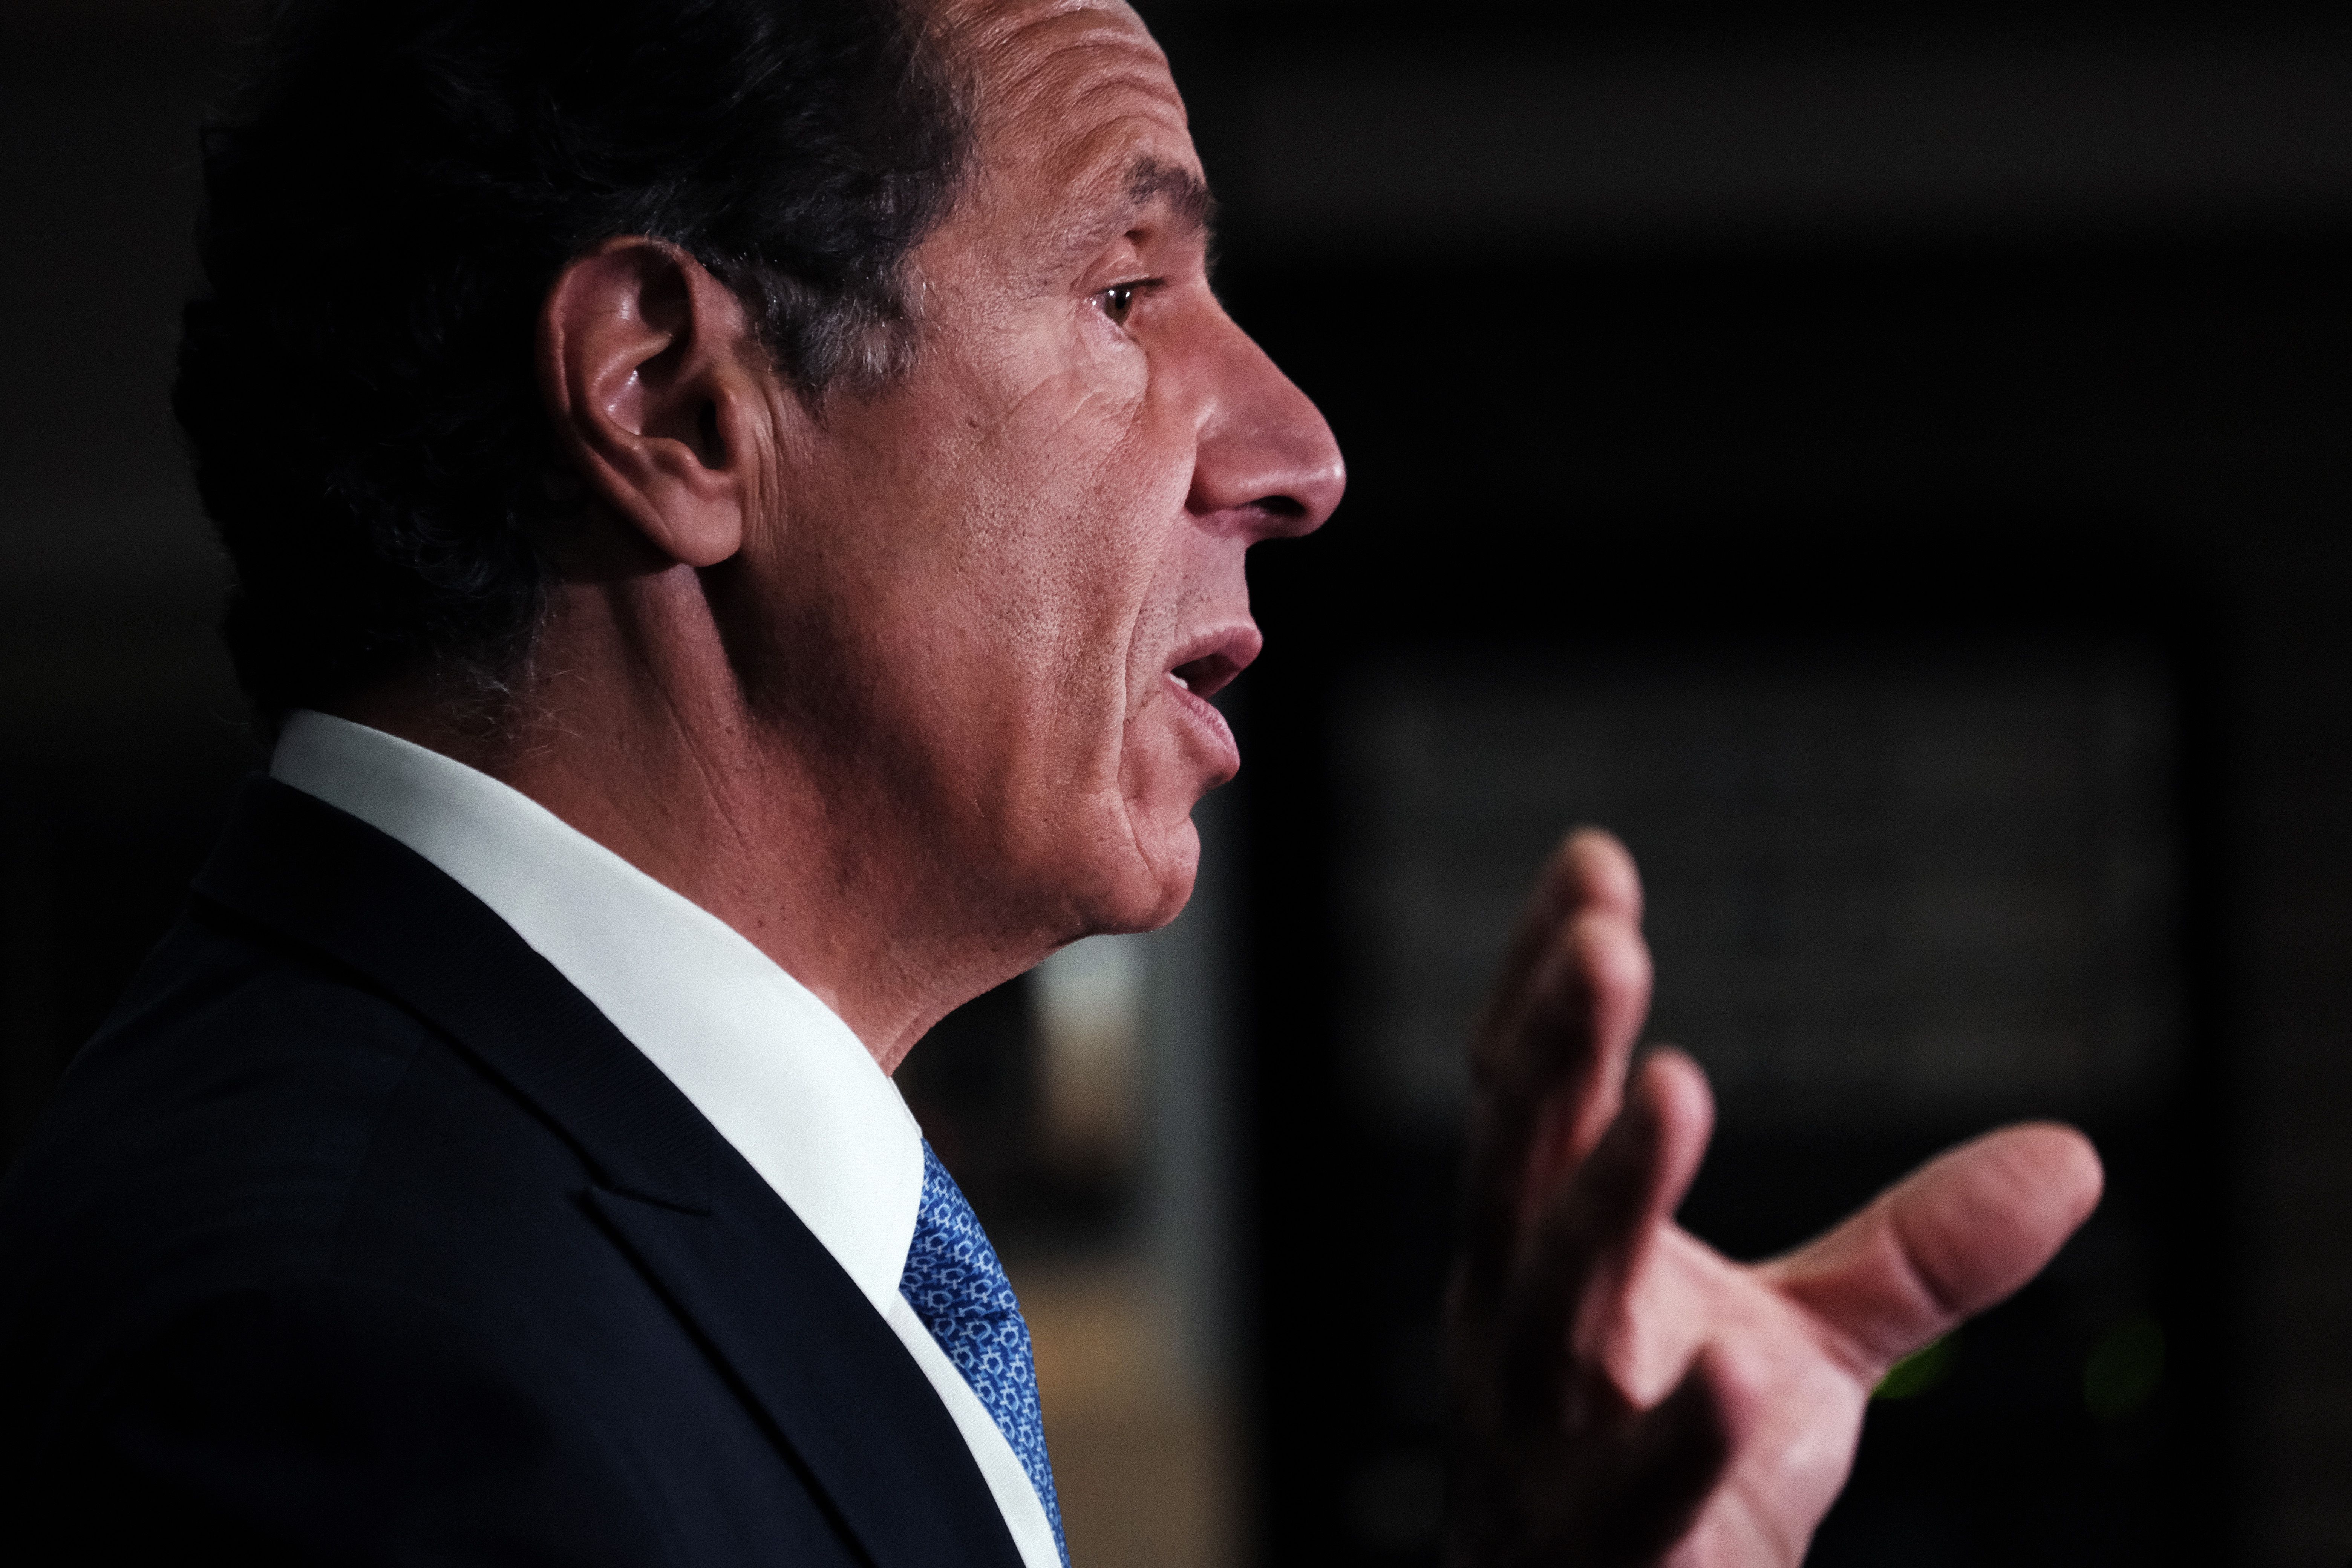 Andrew Cuomo speaks at an event.